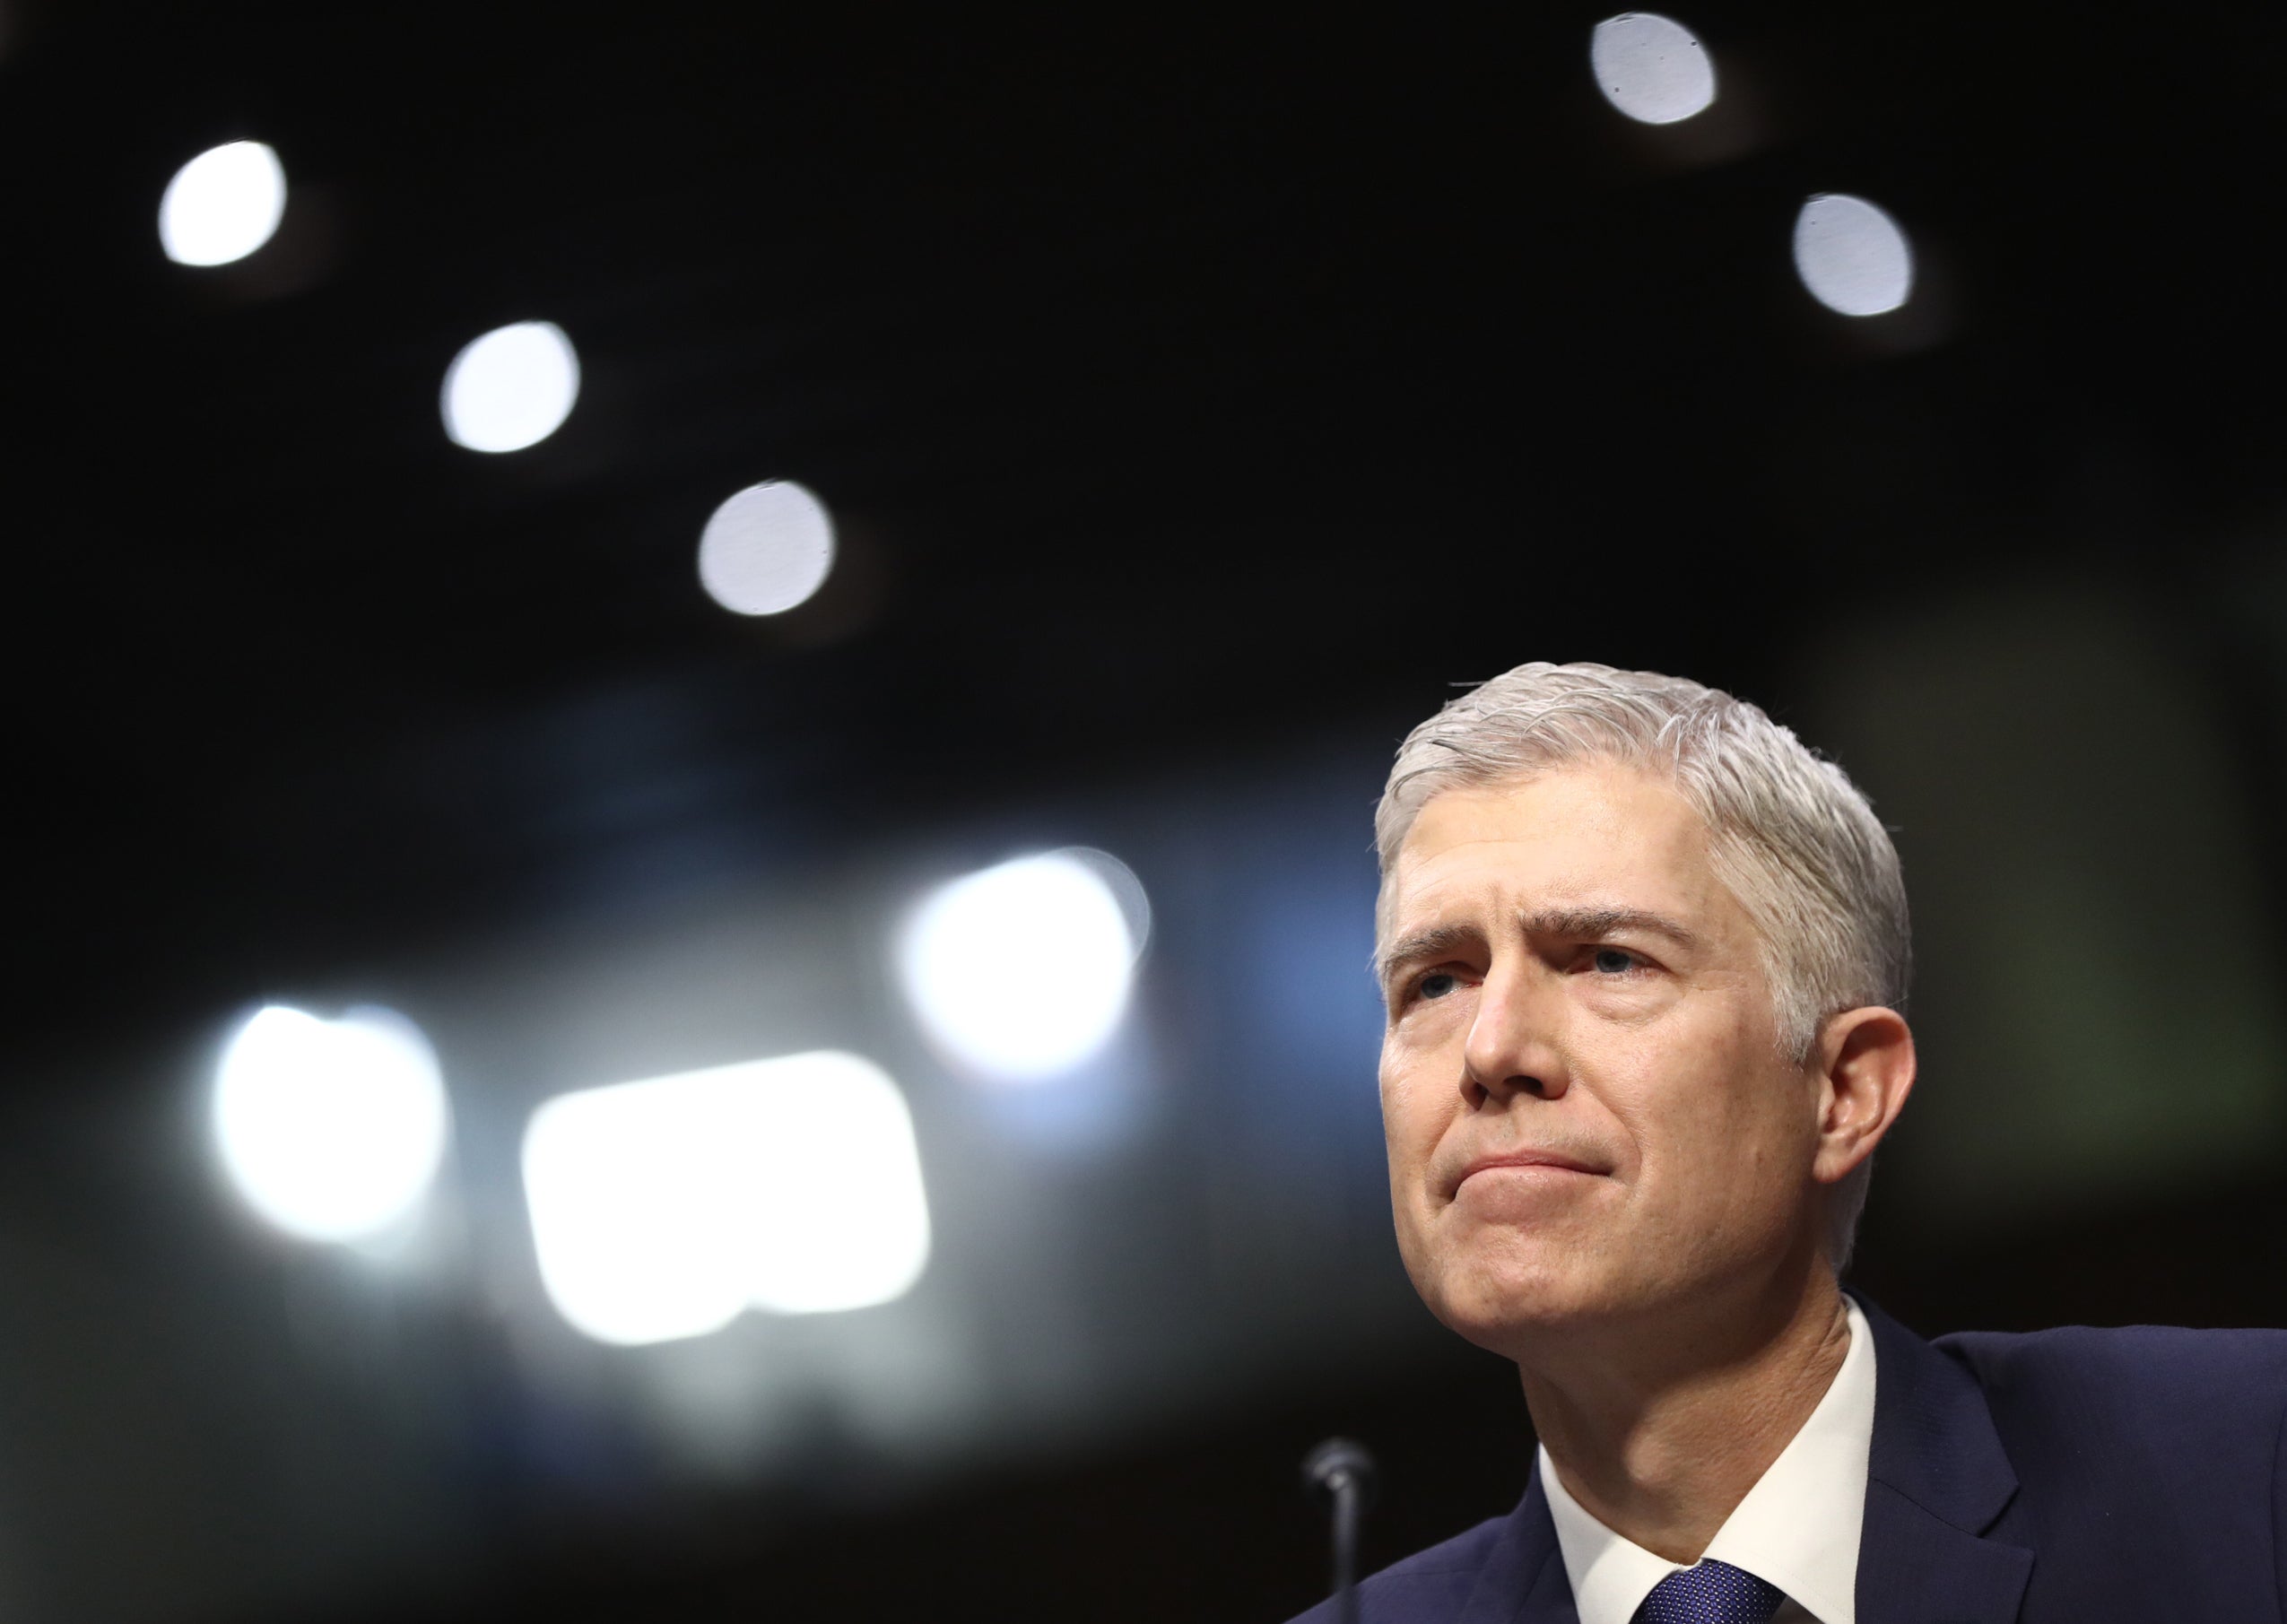 Neil Gorsuch portrait at confirmation hearings